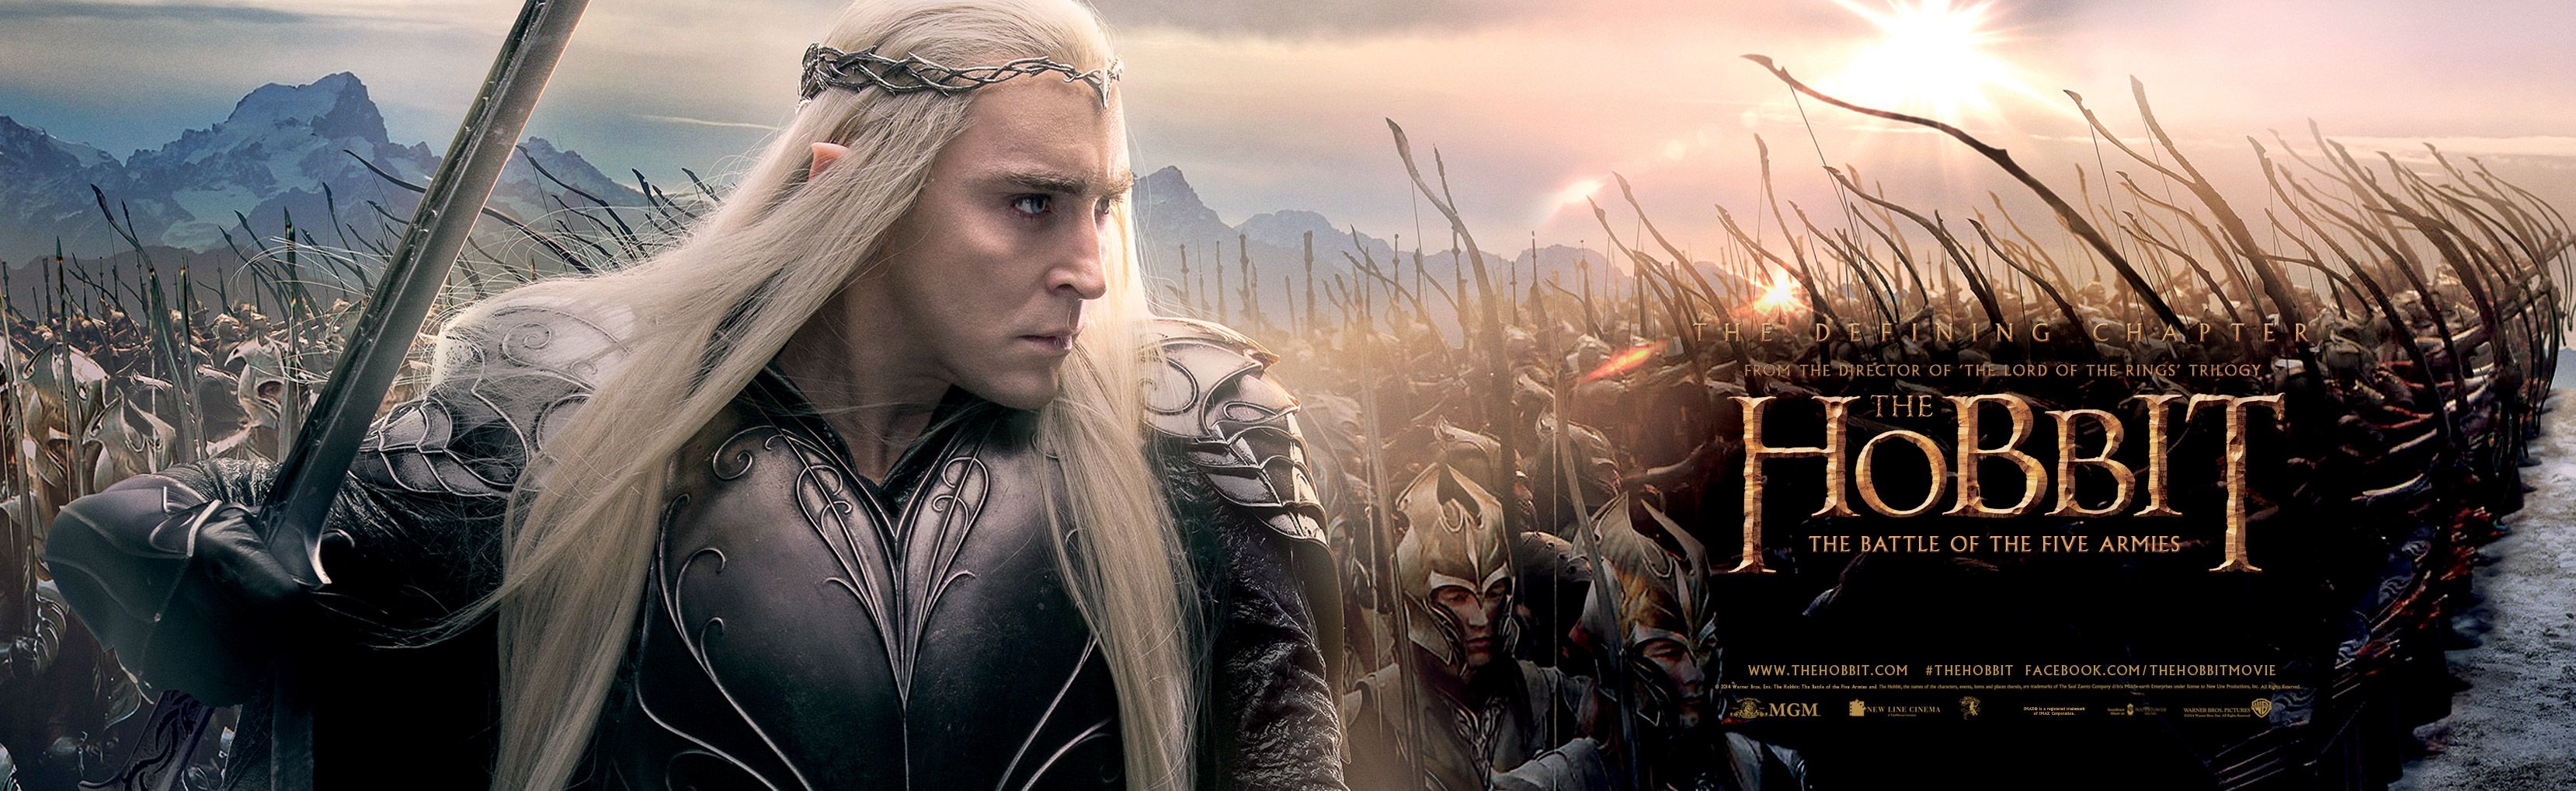 The Hobbit The Battle of the Five Armies Official Movie Site